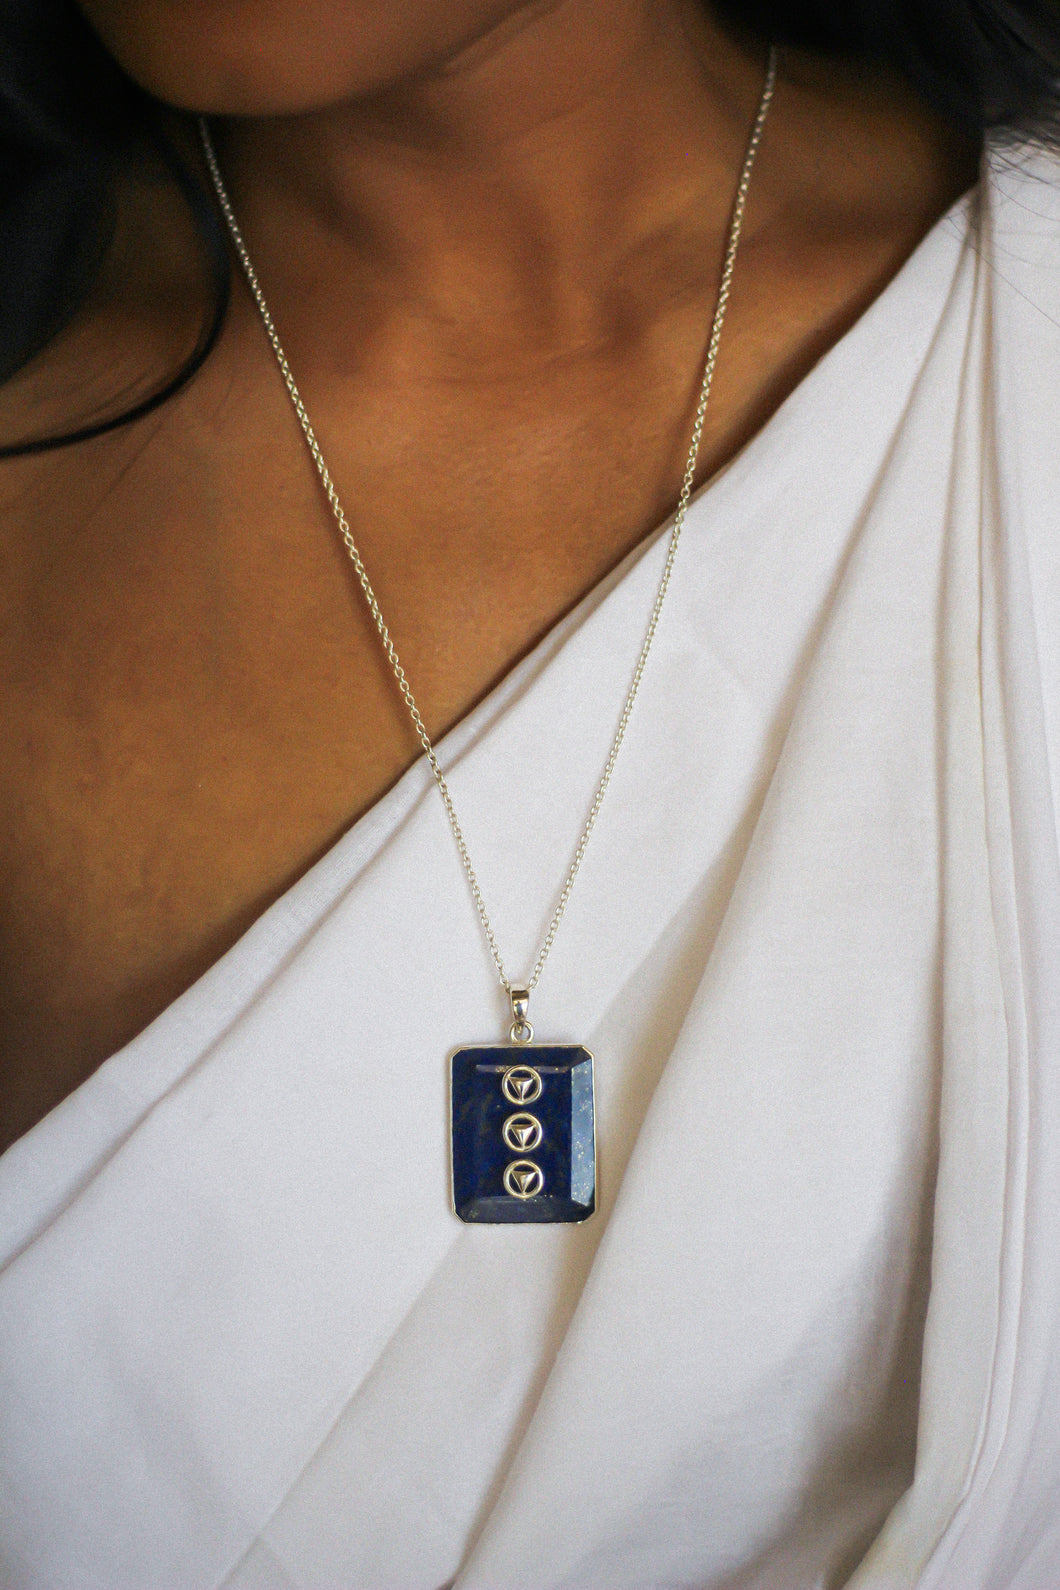 The Path to Balance Necklace